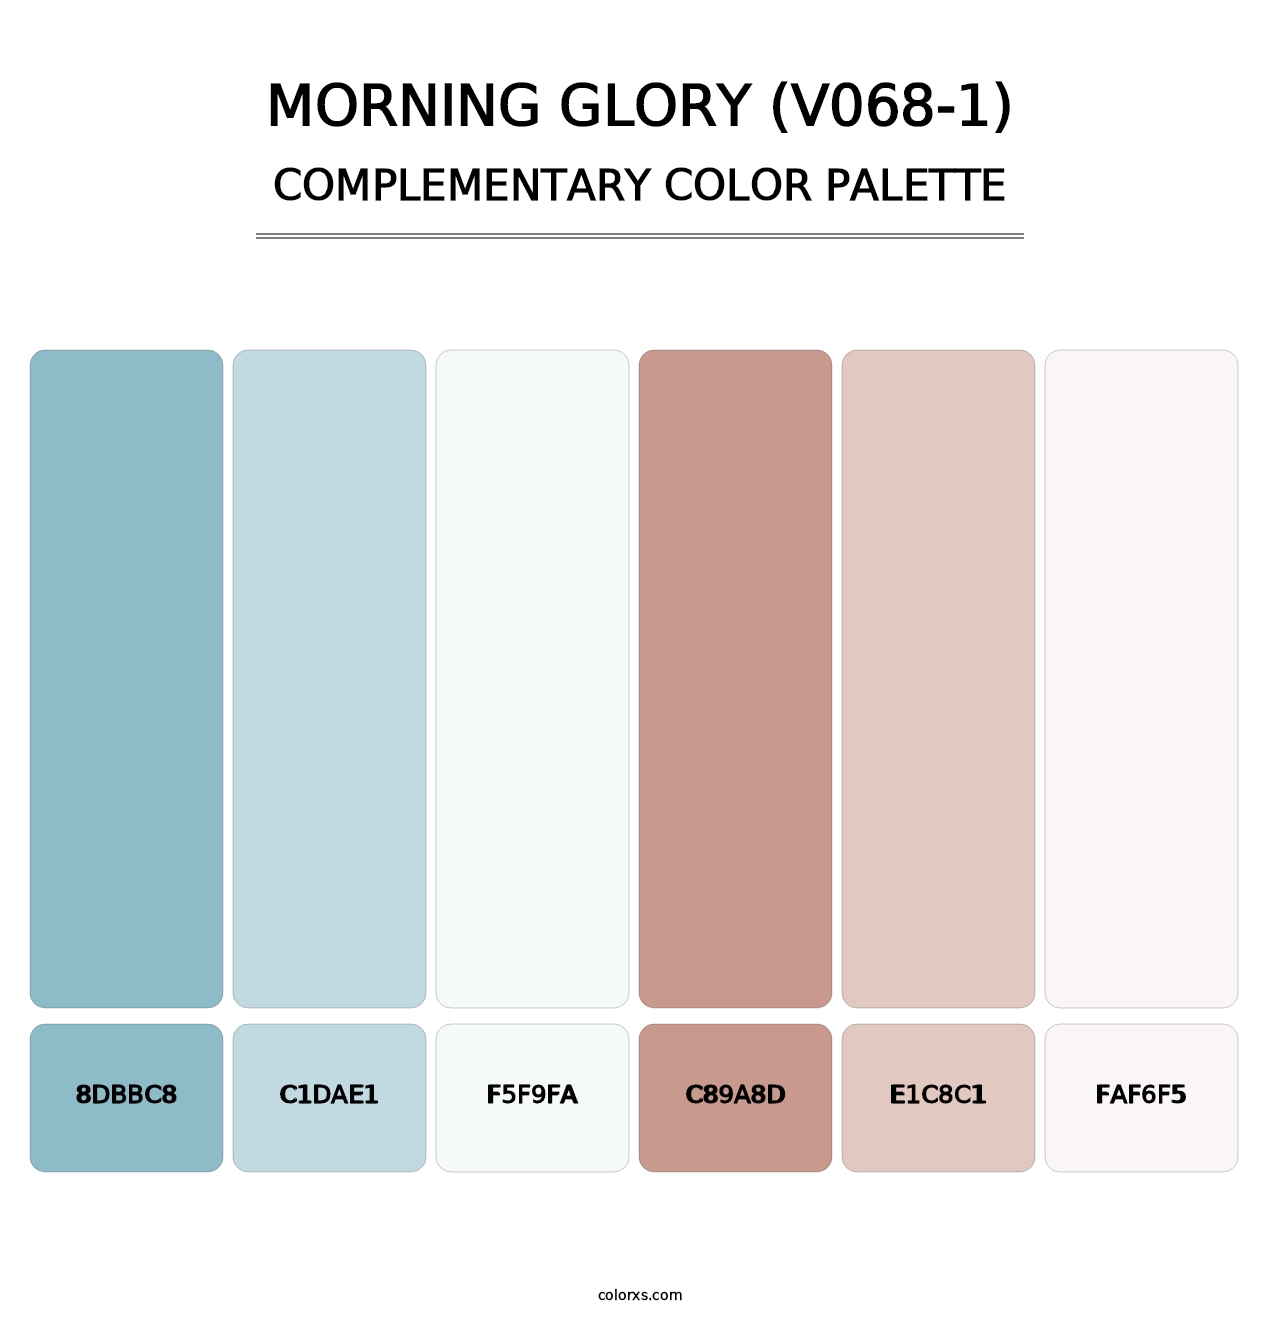 Morning Glory (V068-1) - Complementary Color Palette